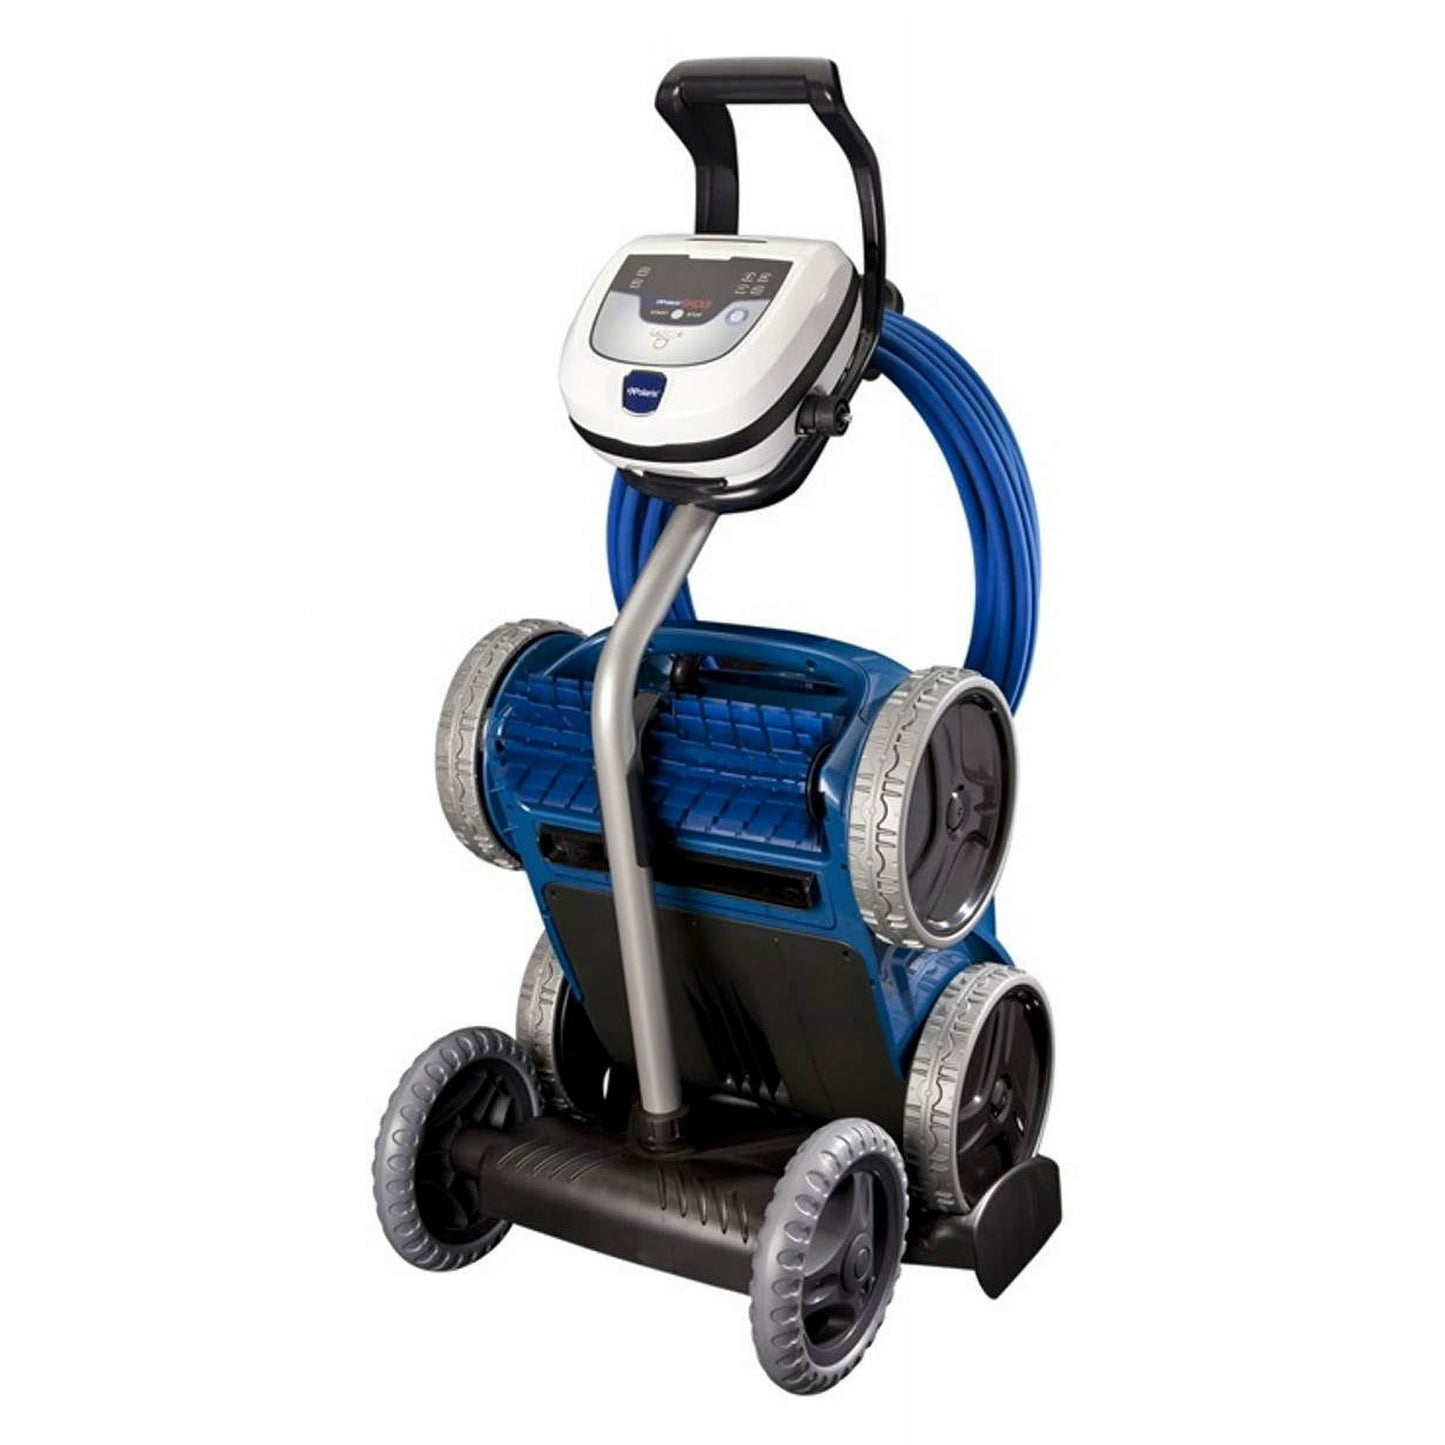 Polaris F9450Sport Robotic Pool Cleaner with Caddy